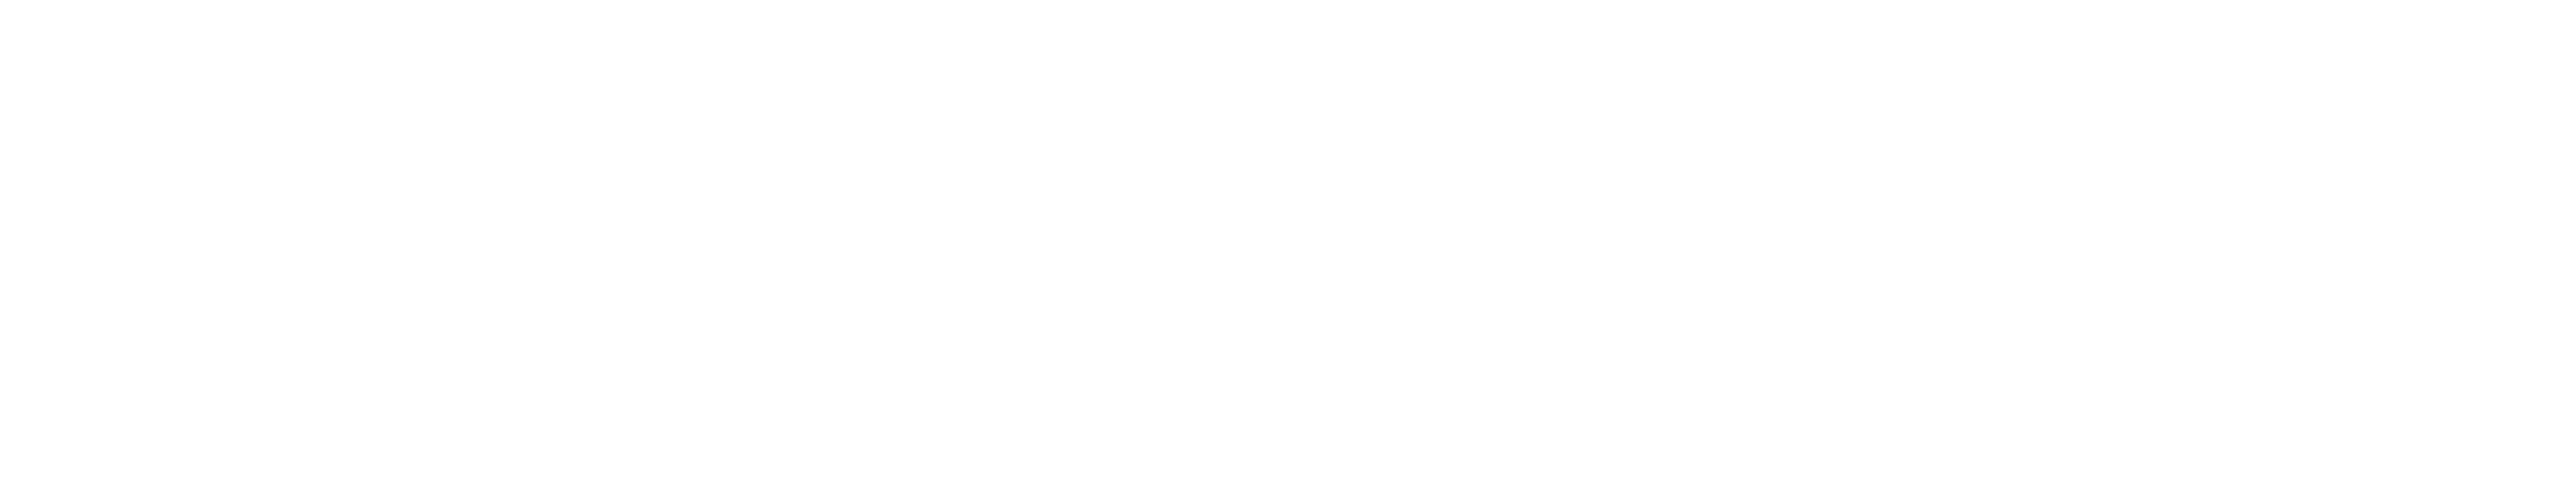 British Society for Refractive Surgery